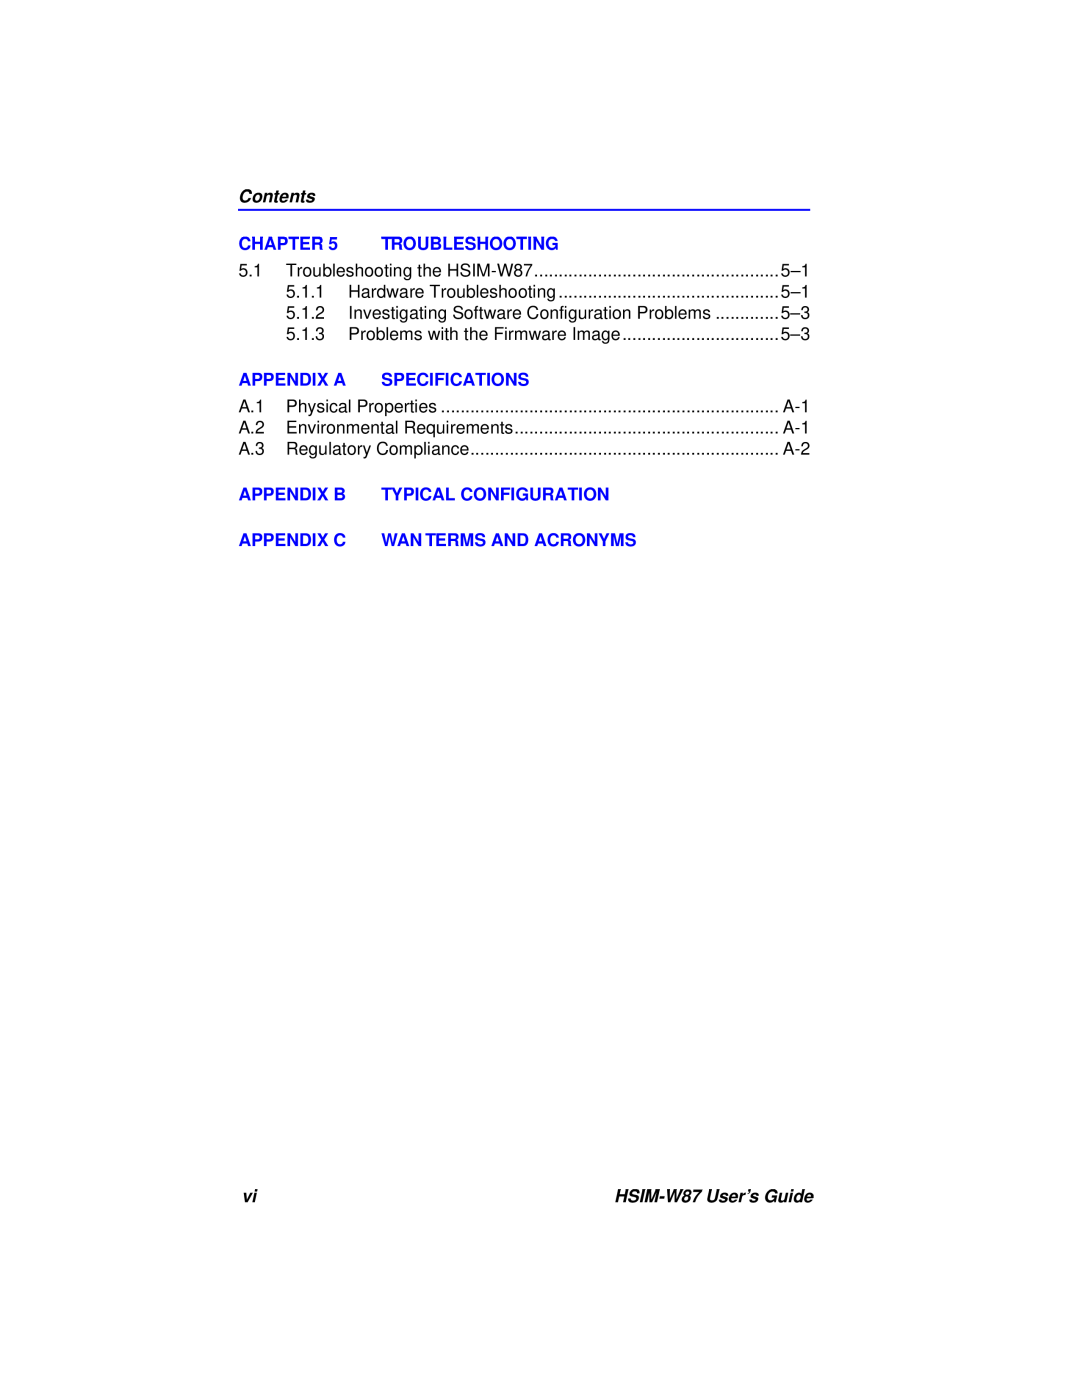 Cabletron Systems HSIM-W87 manual Contents, Chapter, Troubleshooting, Appendix A, Specifications, Appendix B 